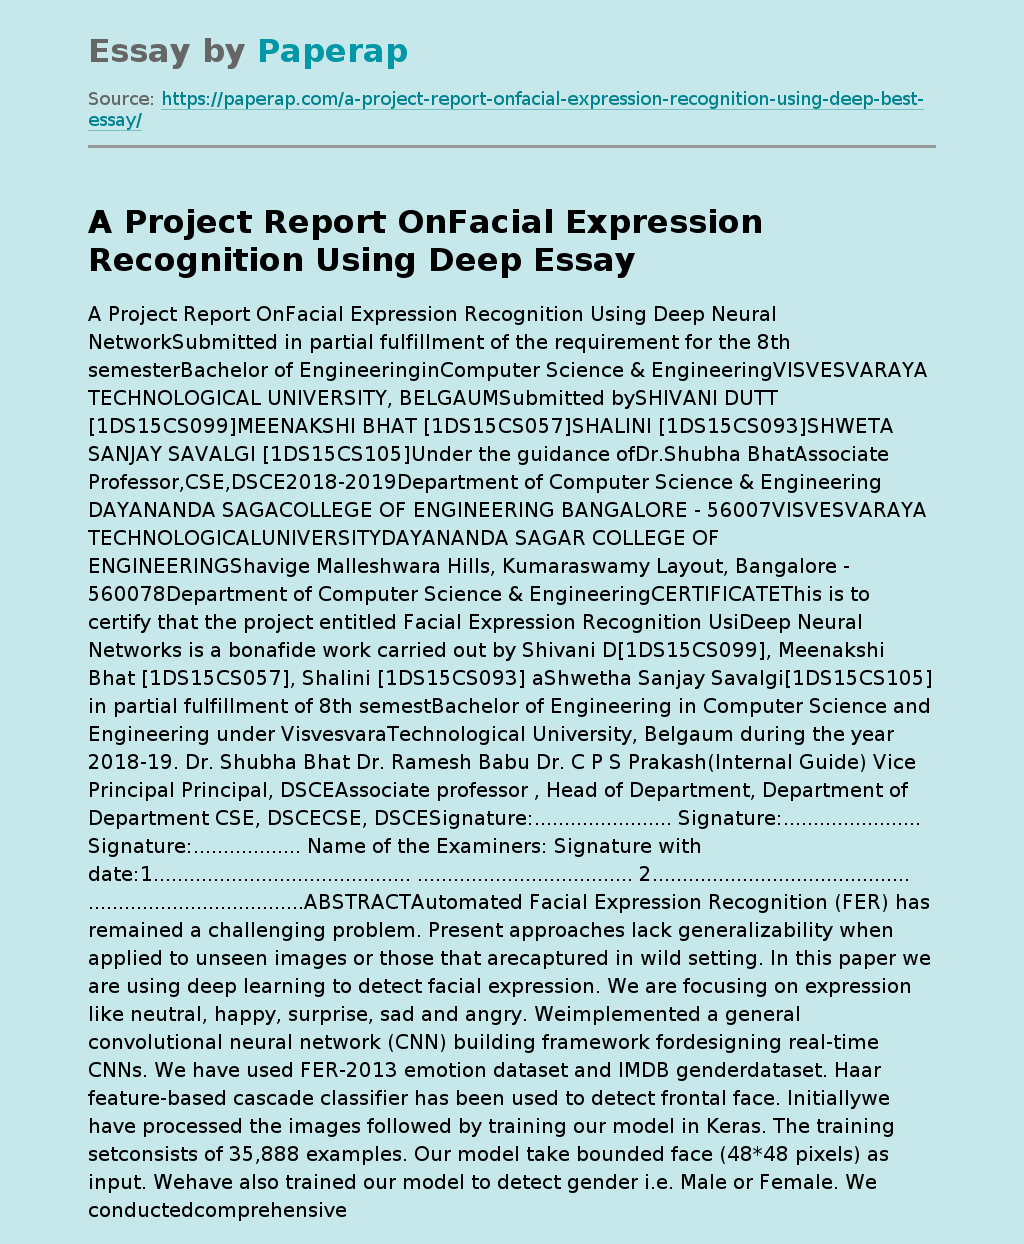 A Project Report OnFacial Expression Recognition Using Deep